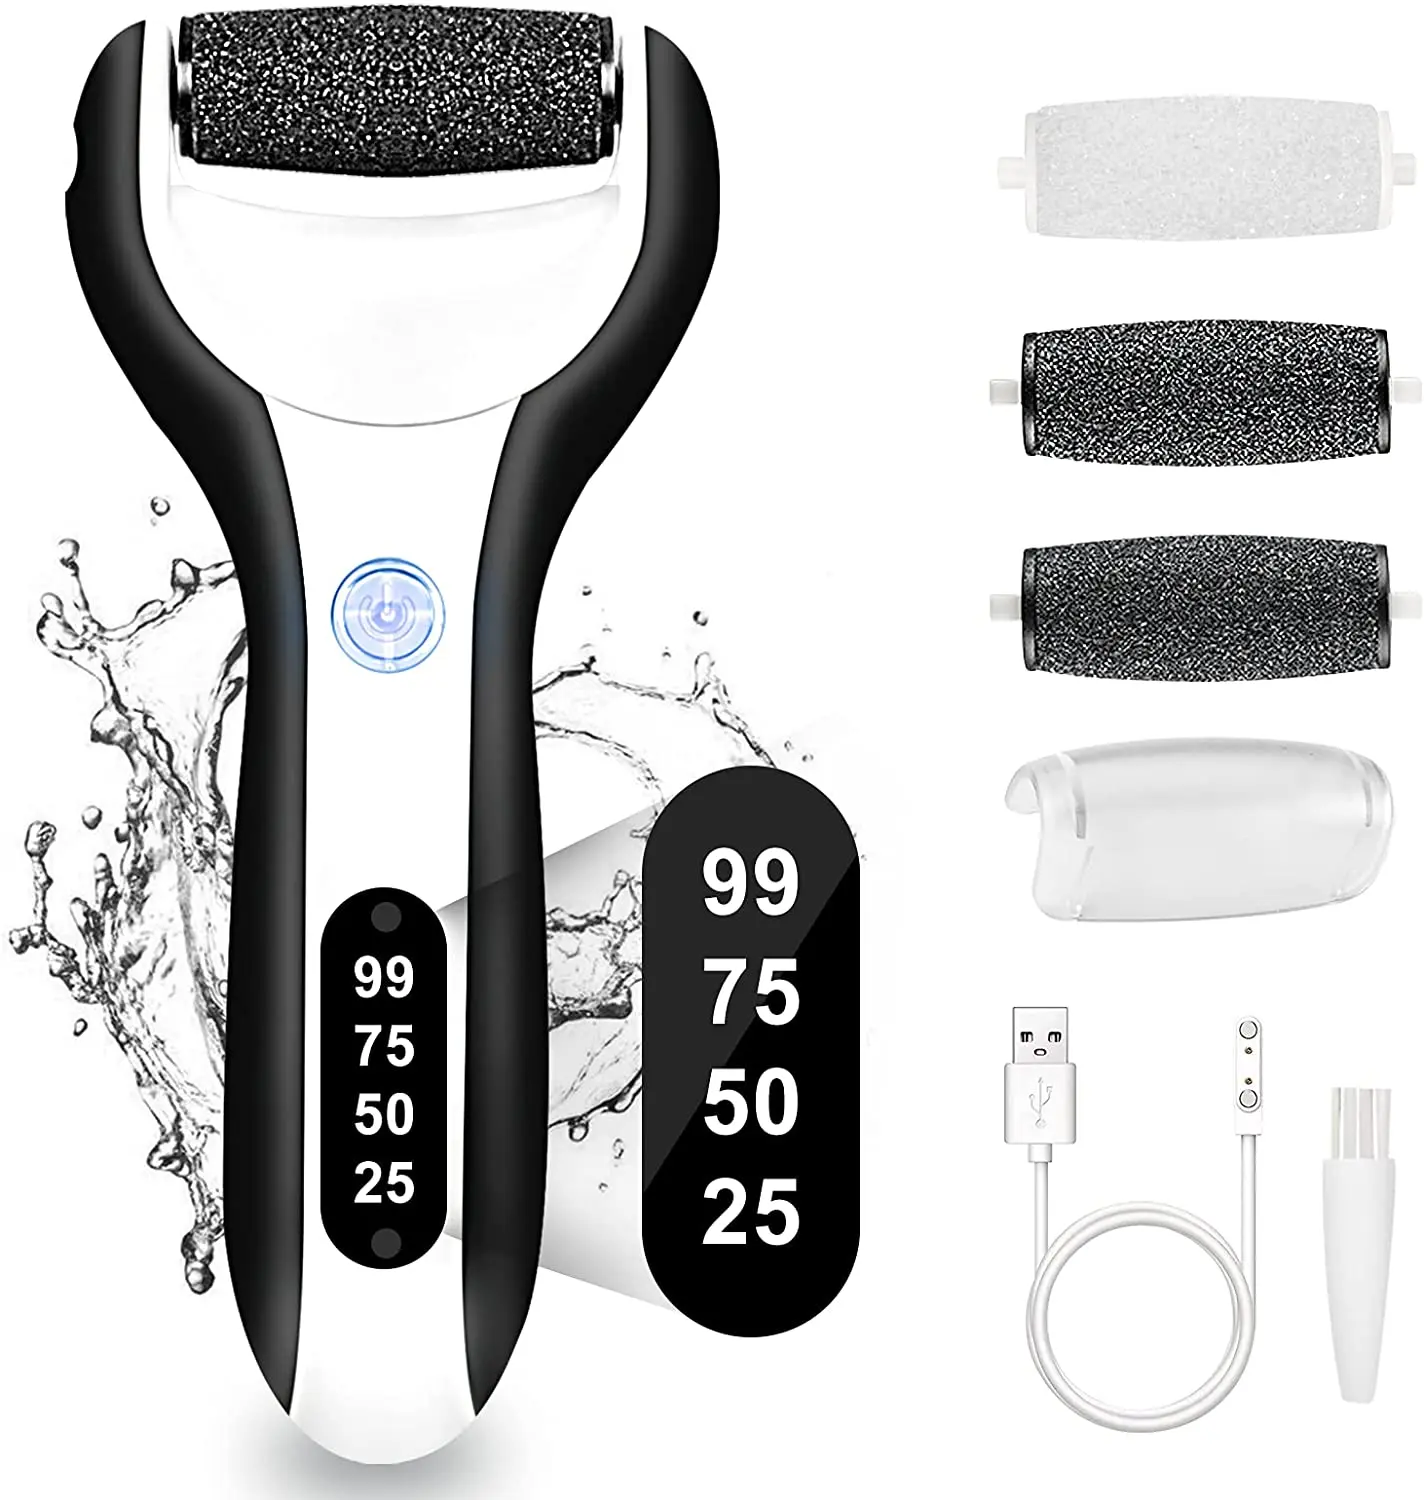 Rechargeable Electric Foot File Callus Remover Machine Pedicure Device Foot Care Tools Feet For Heels Remove Dead Skin black